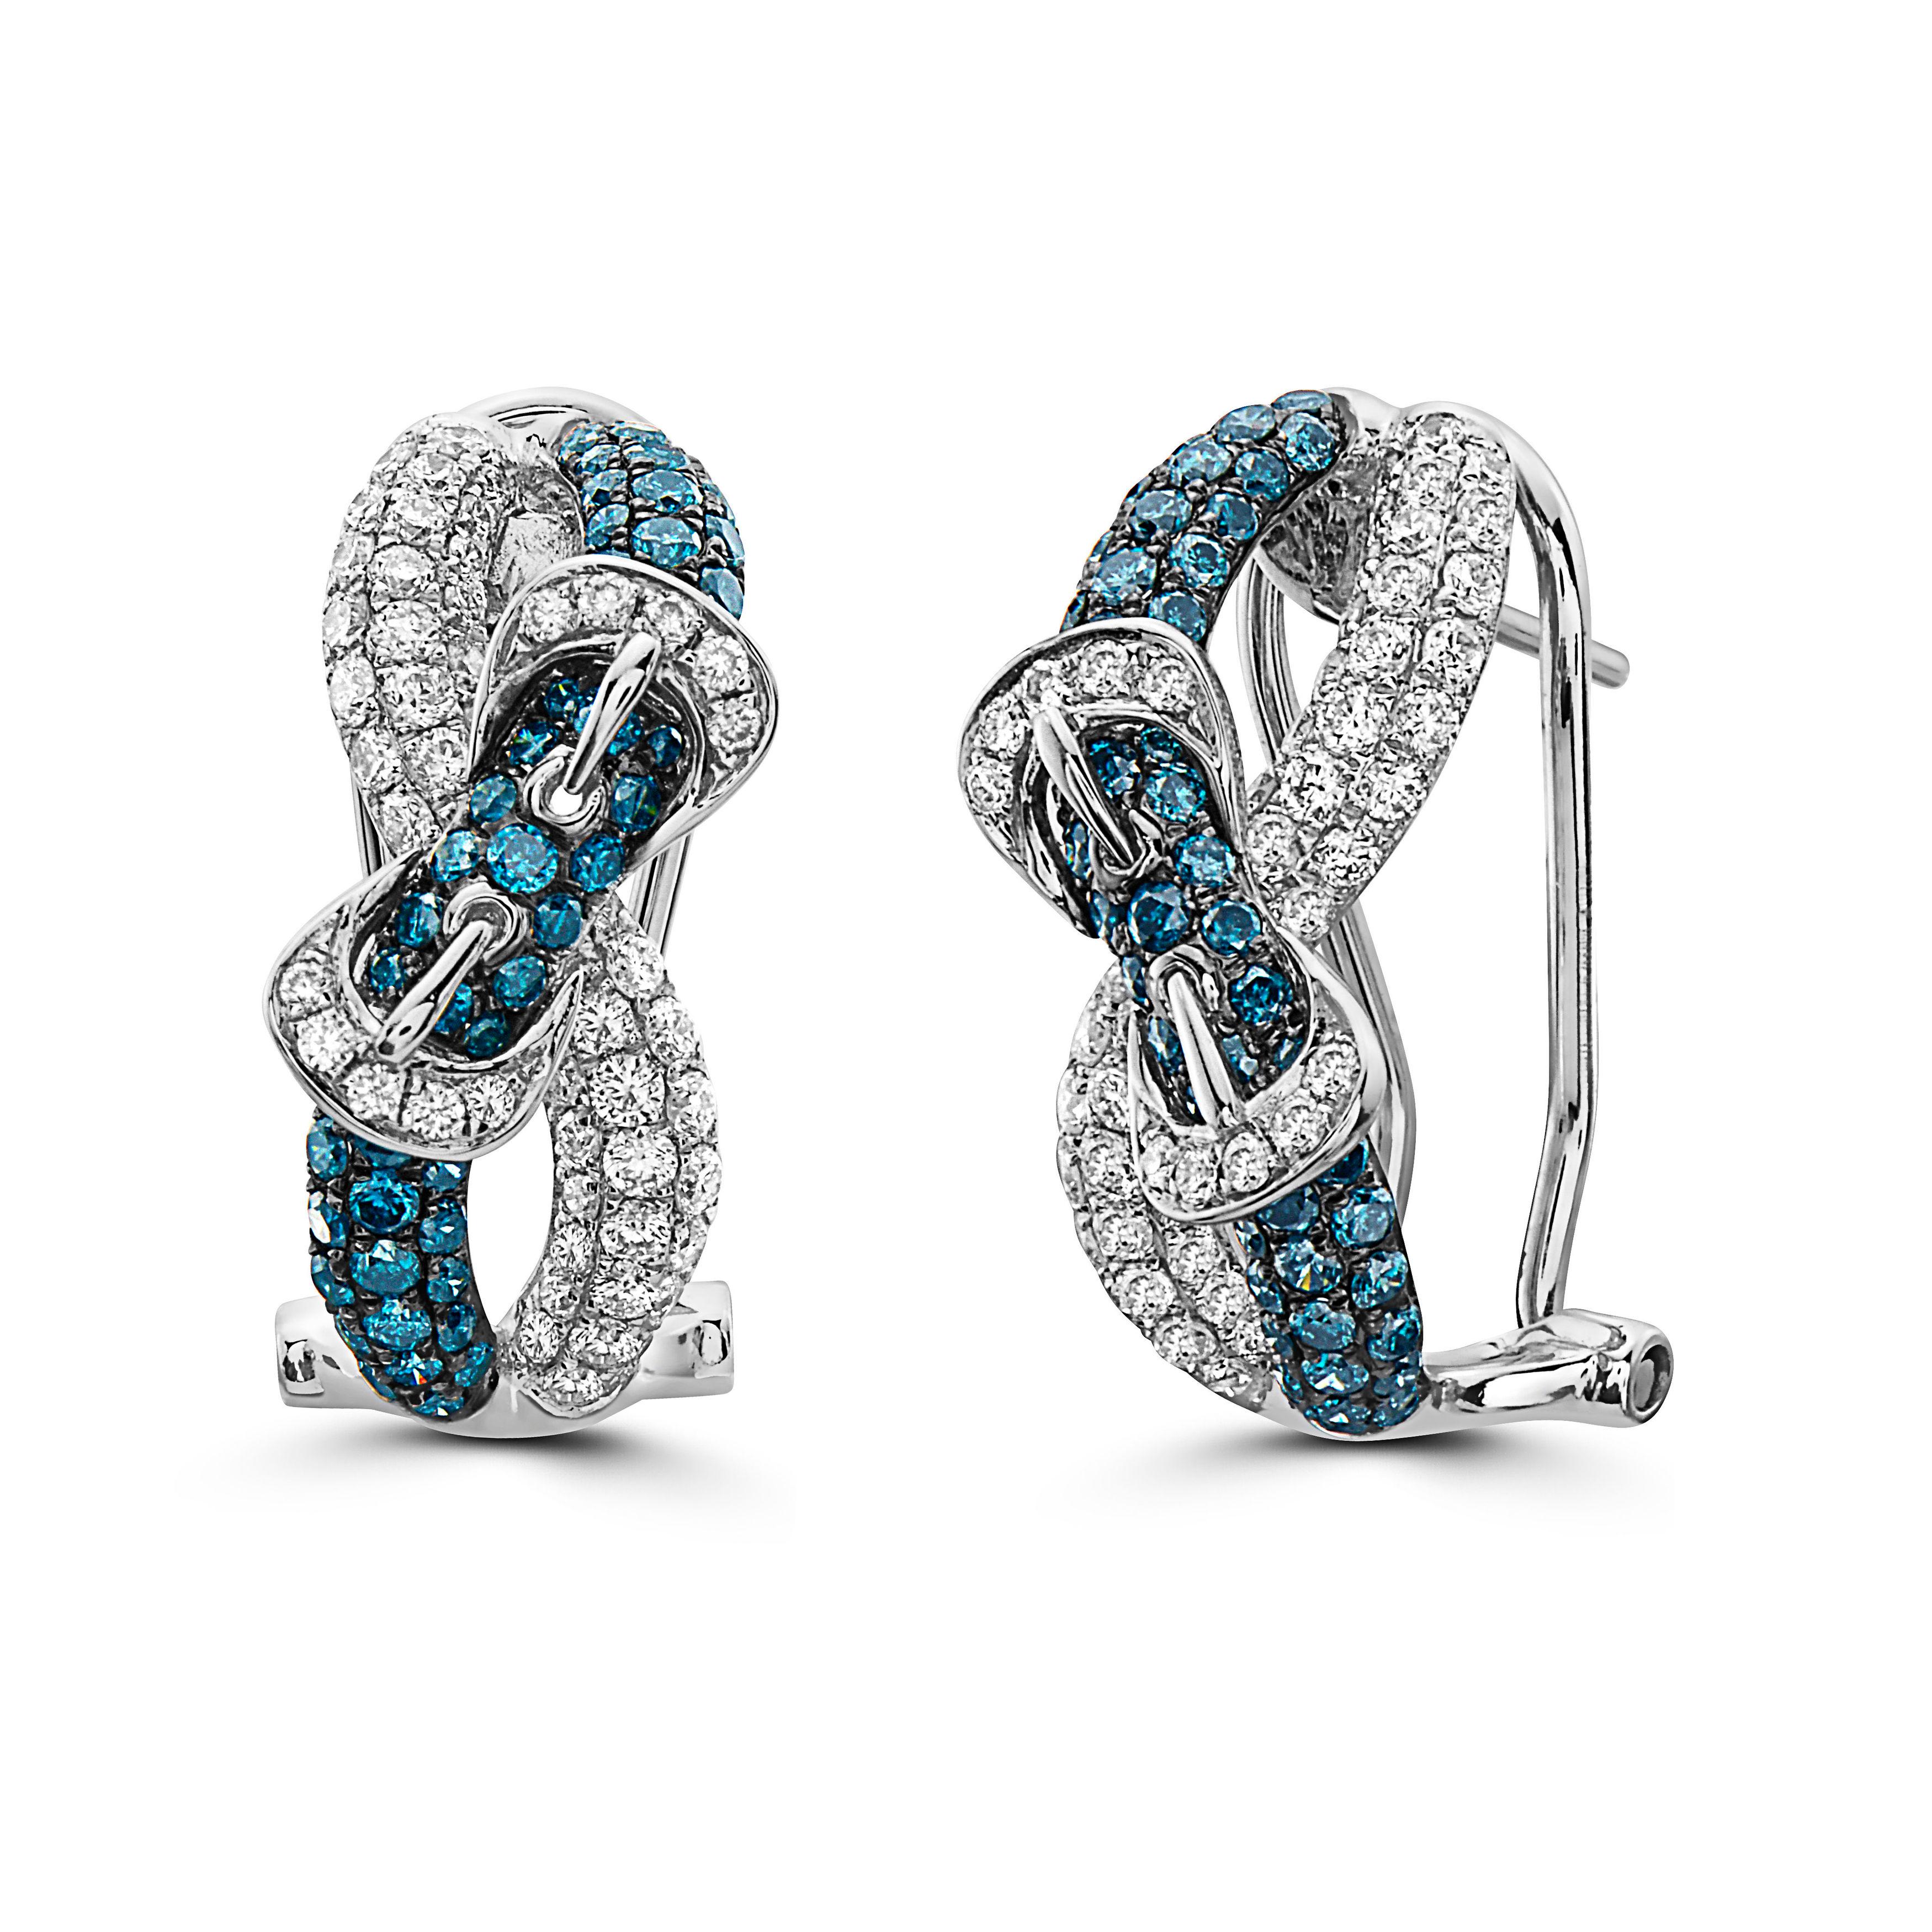 LeVian Earrings 1 3/4 cts Blue and White Natural Diamonds, set in 14K White Gold